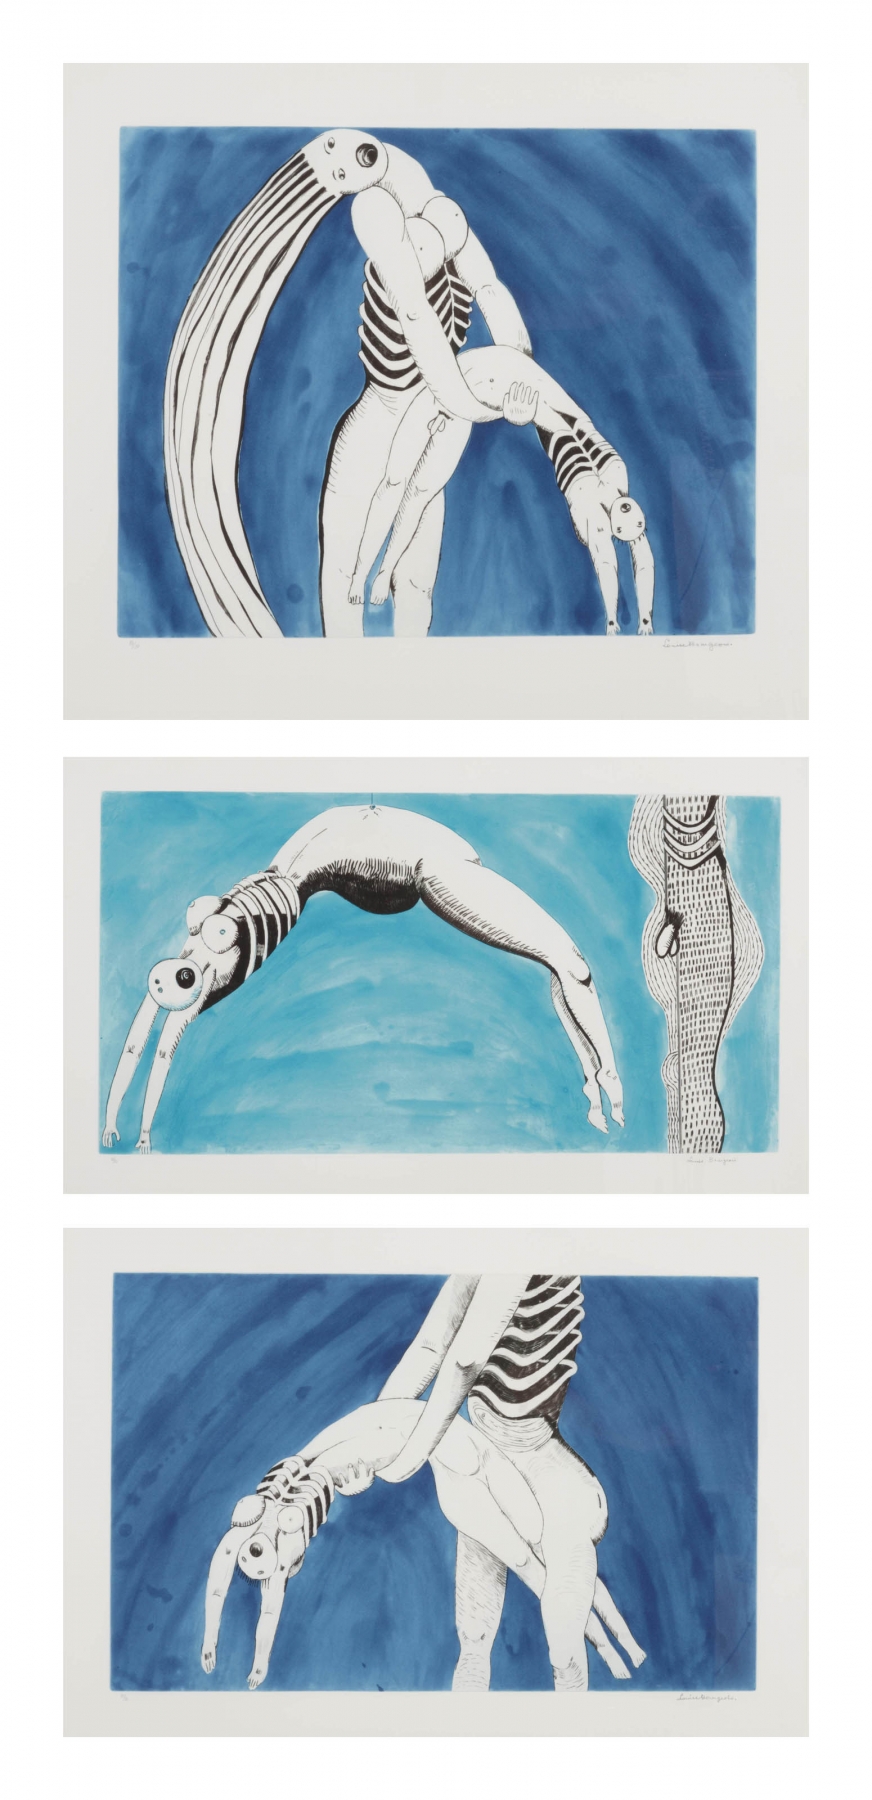 Triptych for the Red Room, 1994
3 aquatints, drypoints, and engravings
Sheet sizes vary
Edition of 30 + proofs

Inquire
&amp;nbsp;